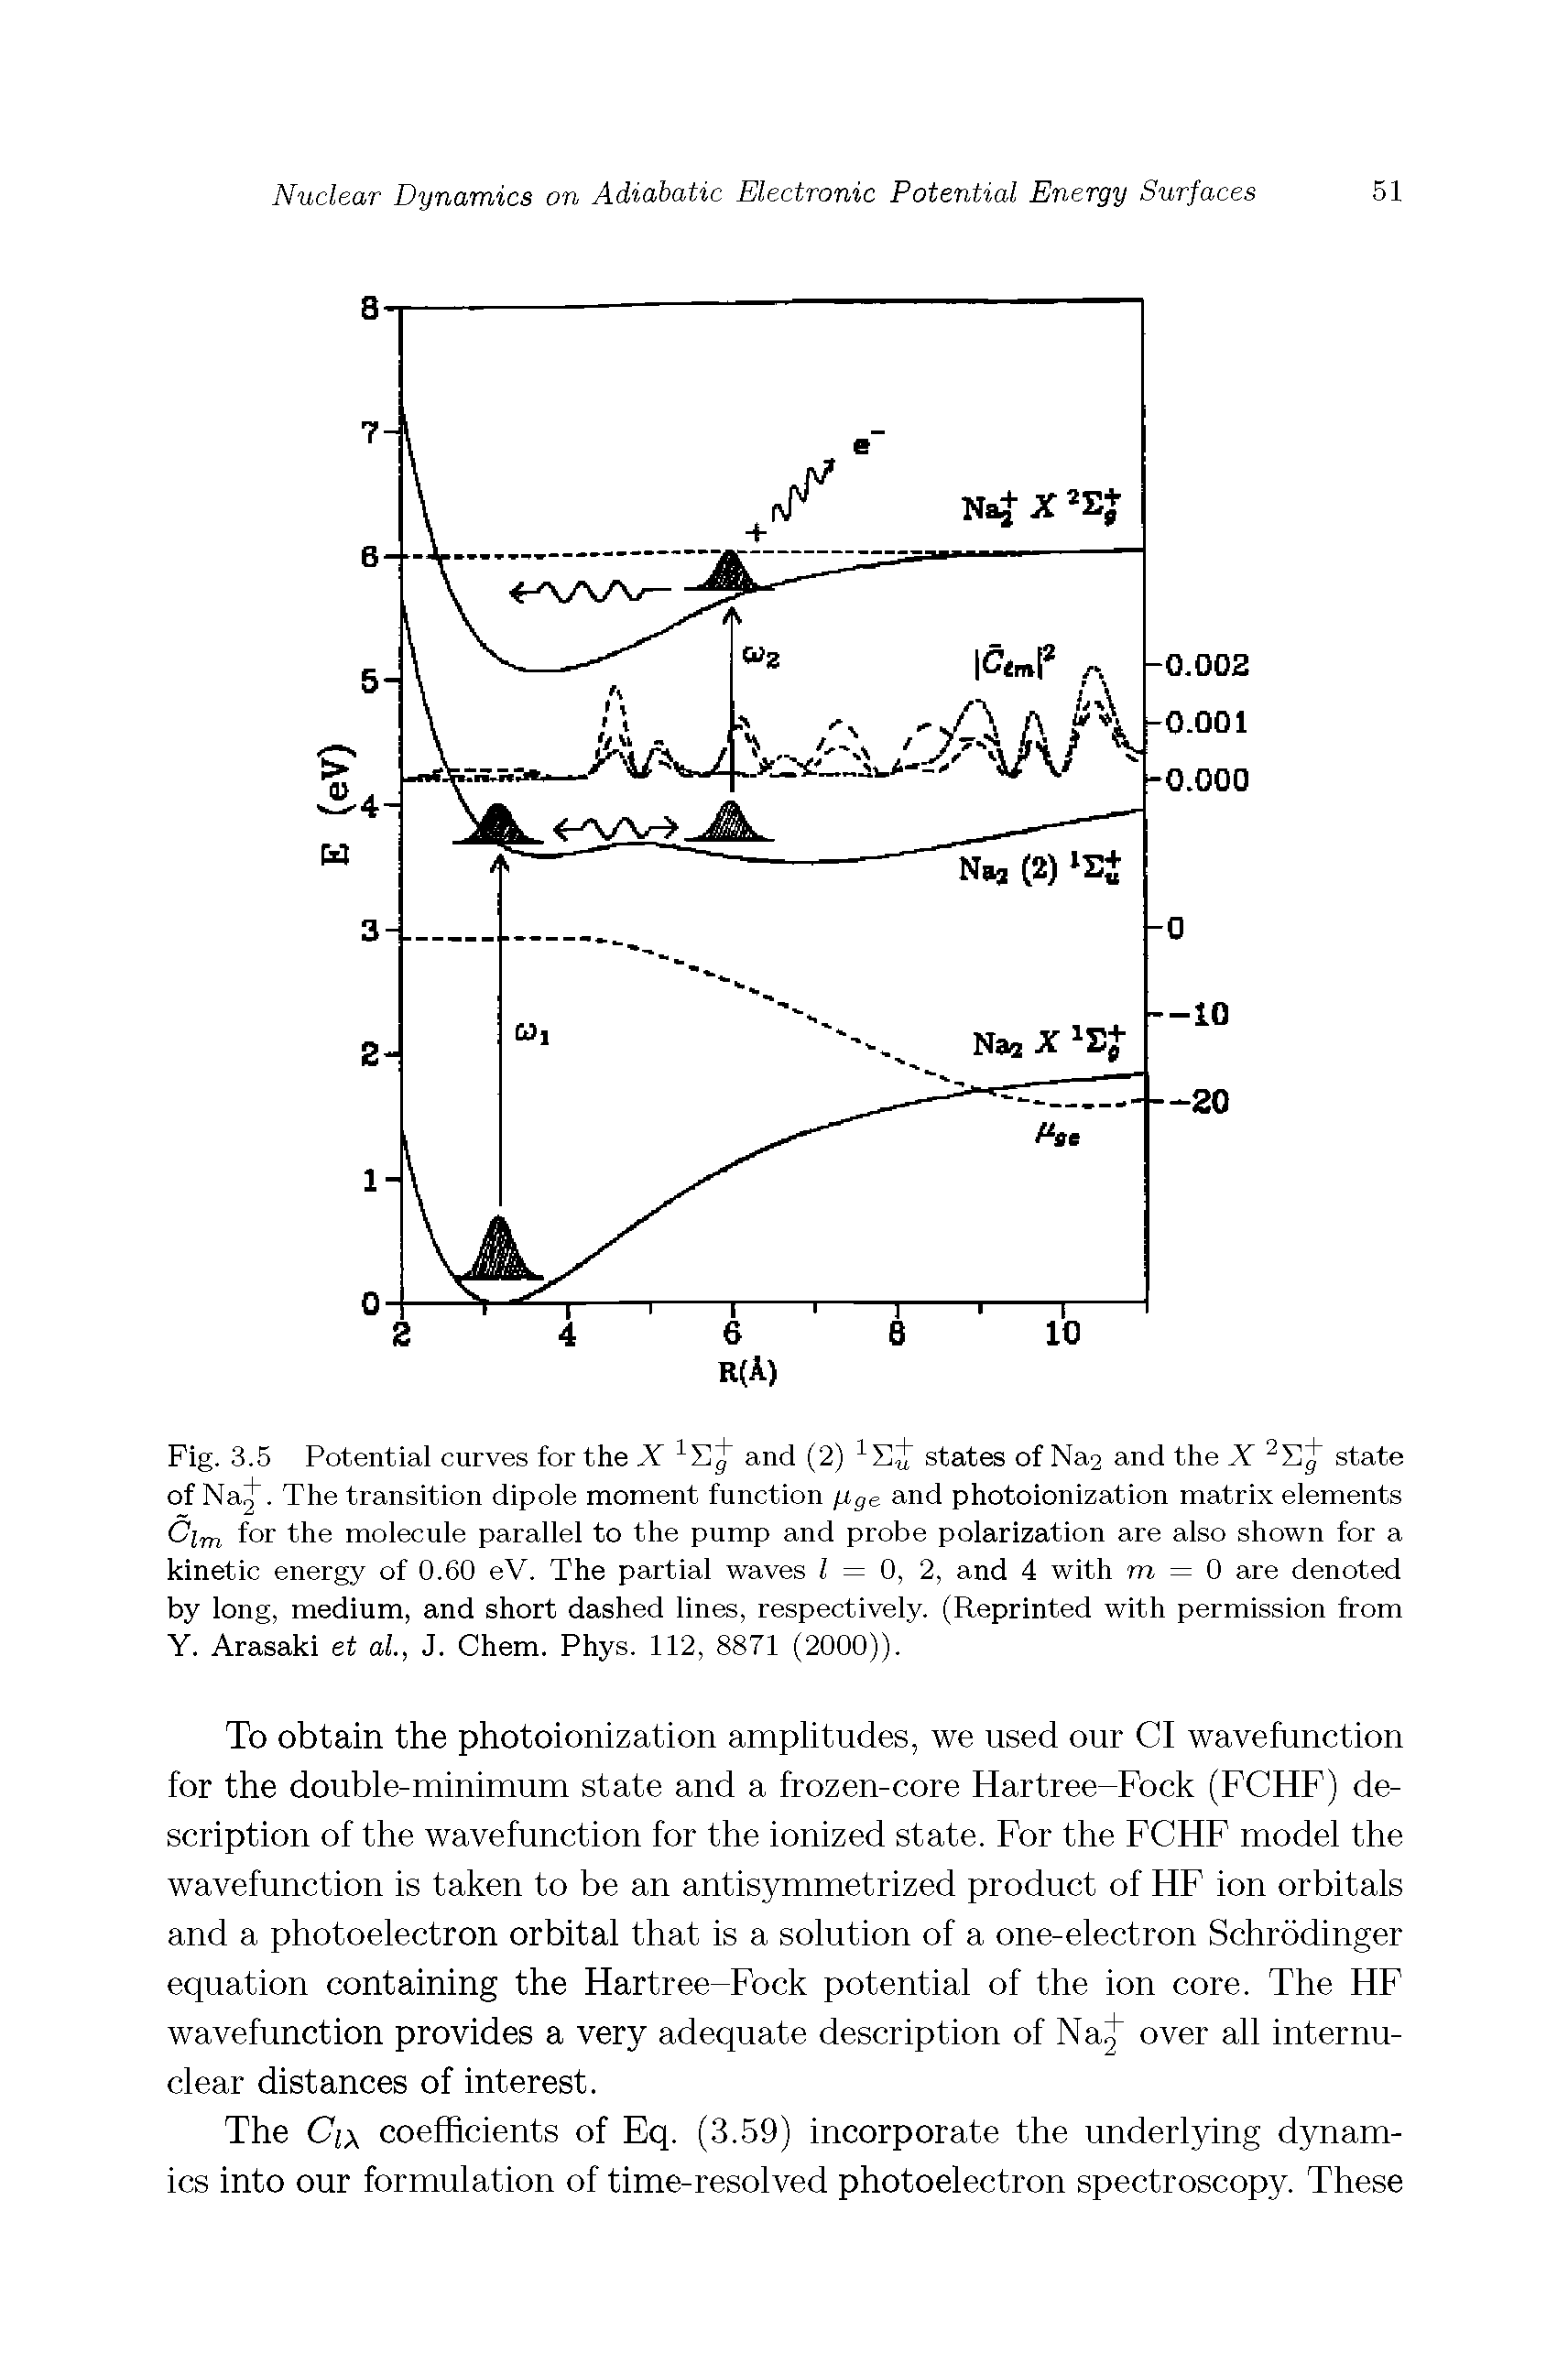 Fig. 3.5 Potential curves for the X and (2) states of Na2 and the X state of NaJ. The transition dipole moment function fj,ge and photoionization matrix elements Qm for the molecule parallel to the pump and probe polarization are also shown for a kinetic energy of 0.60 eV. The partial waves I = 0, 2, and 4 with m = 0 are denoted by long, medium, and short dashed lines, respectively. (Reprinted with permission from Y. Arasaki et al, J. Chem. Phys. 112, 8871 (2000)).